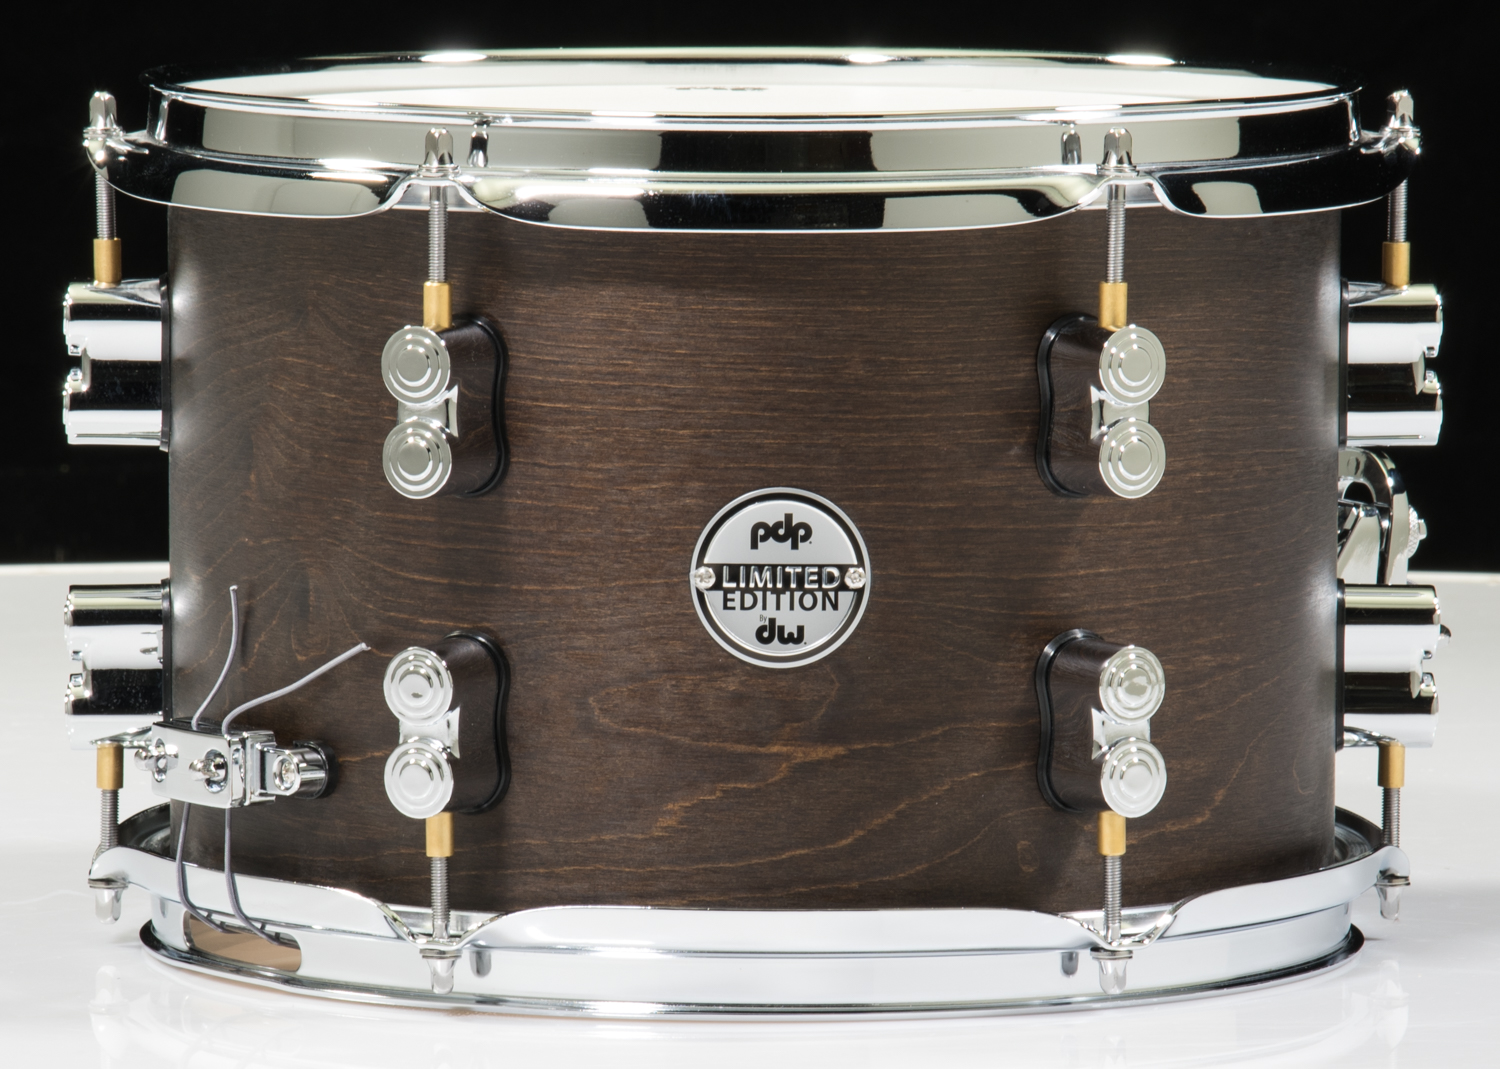 PDP Limited Edition Dry Maple 8x12 Snare Drum Dark Walnut Finish